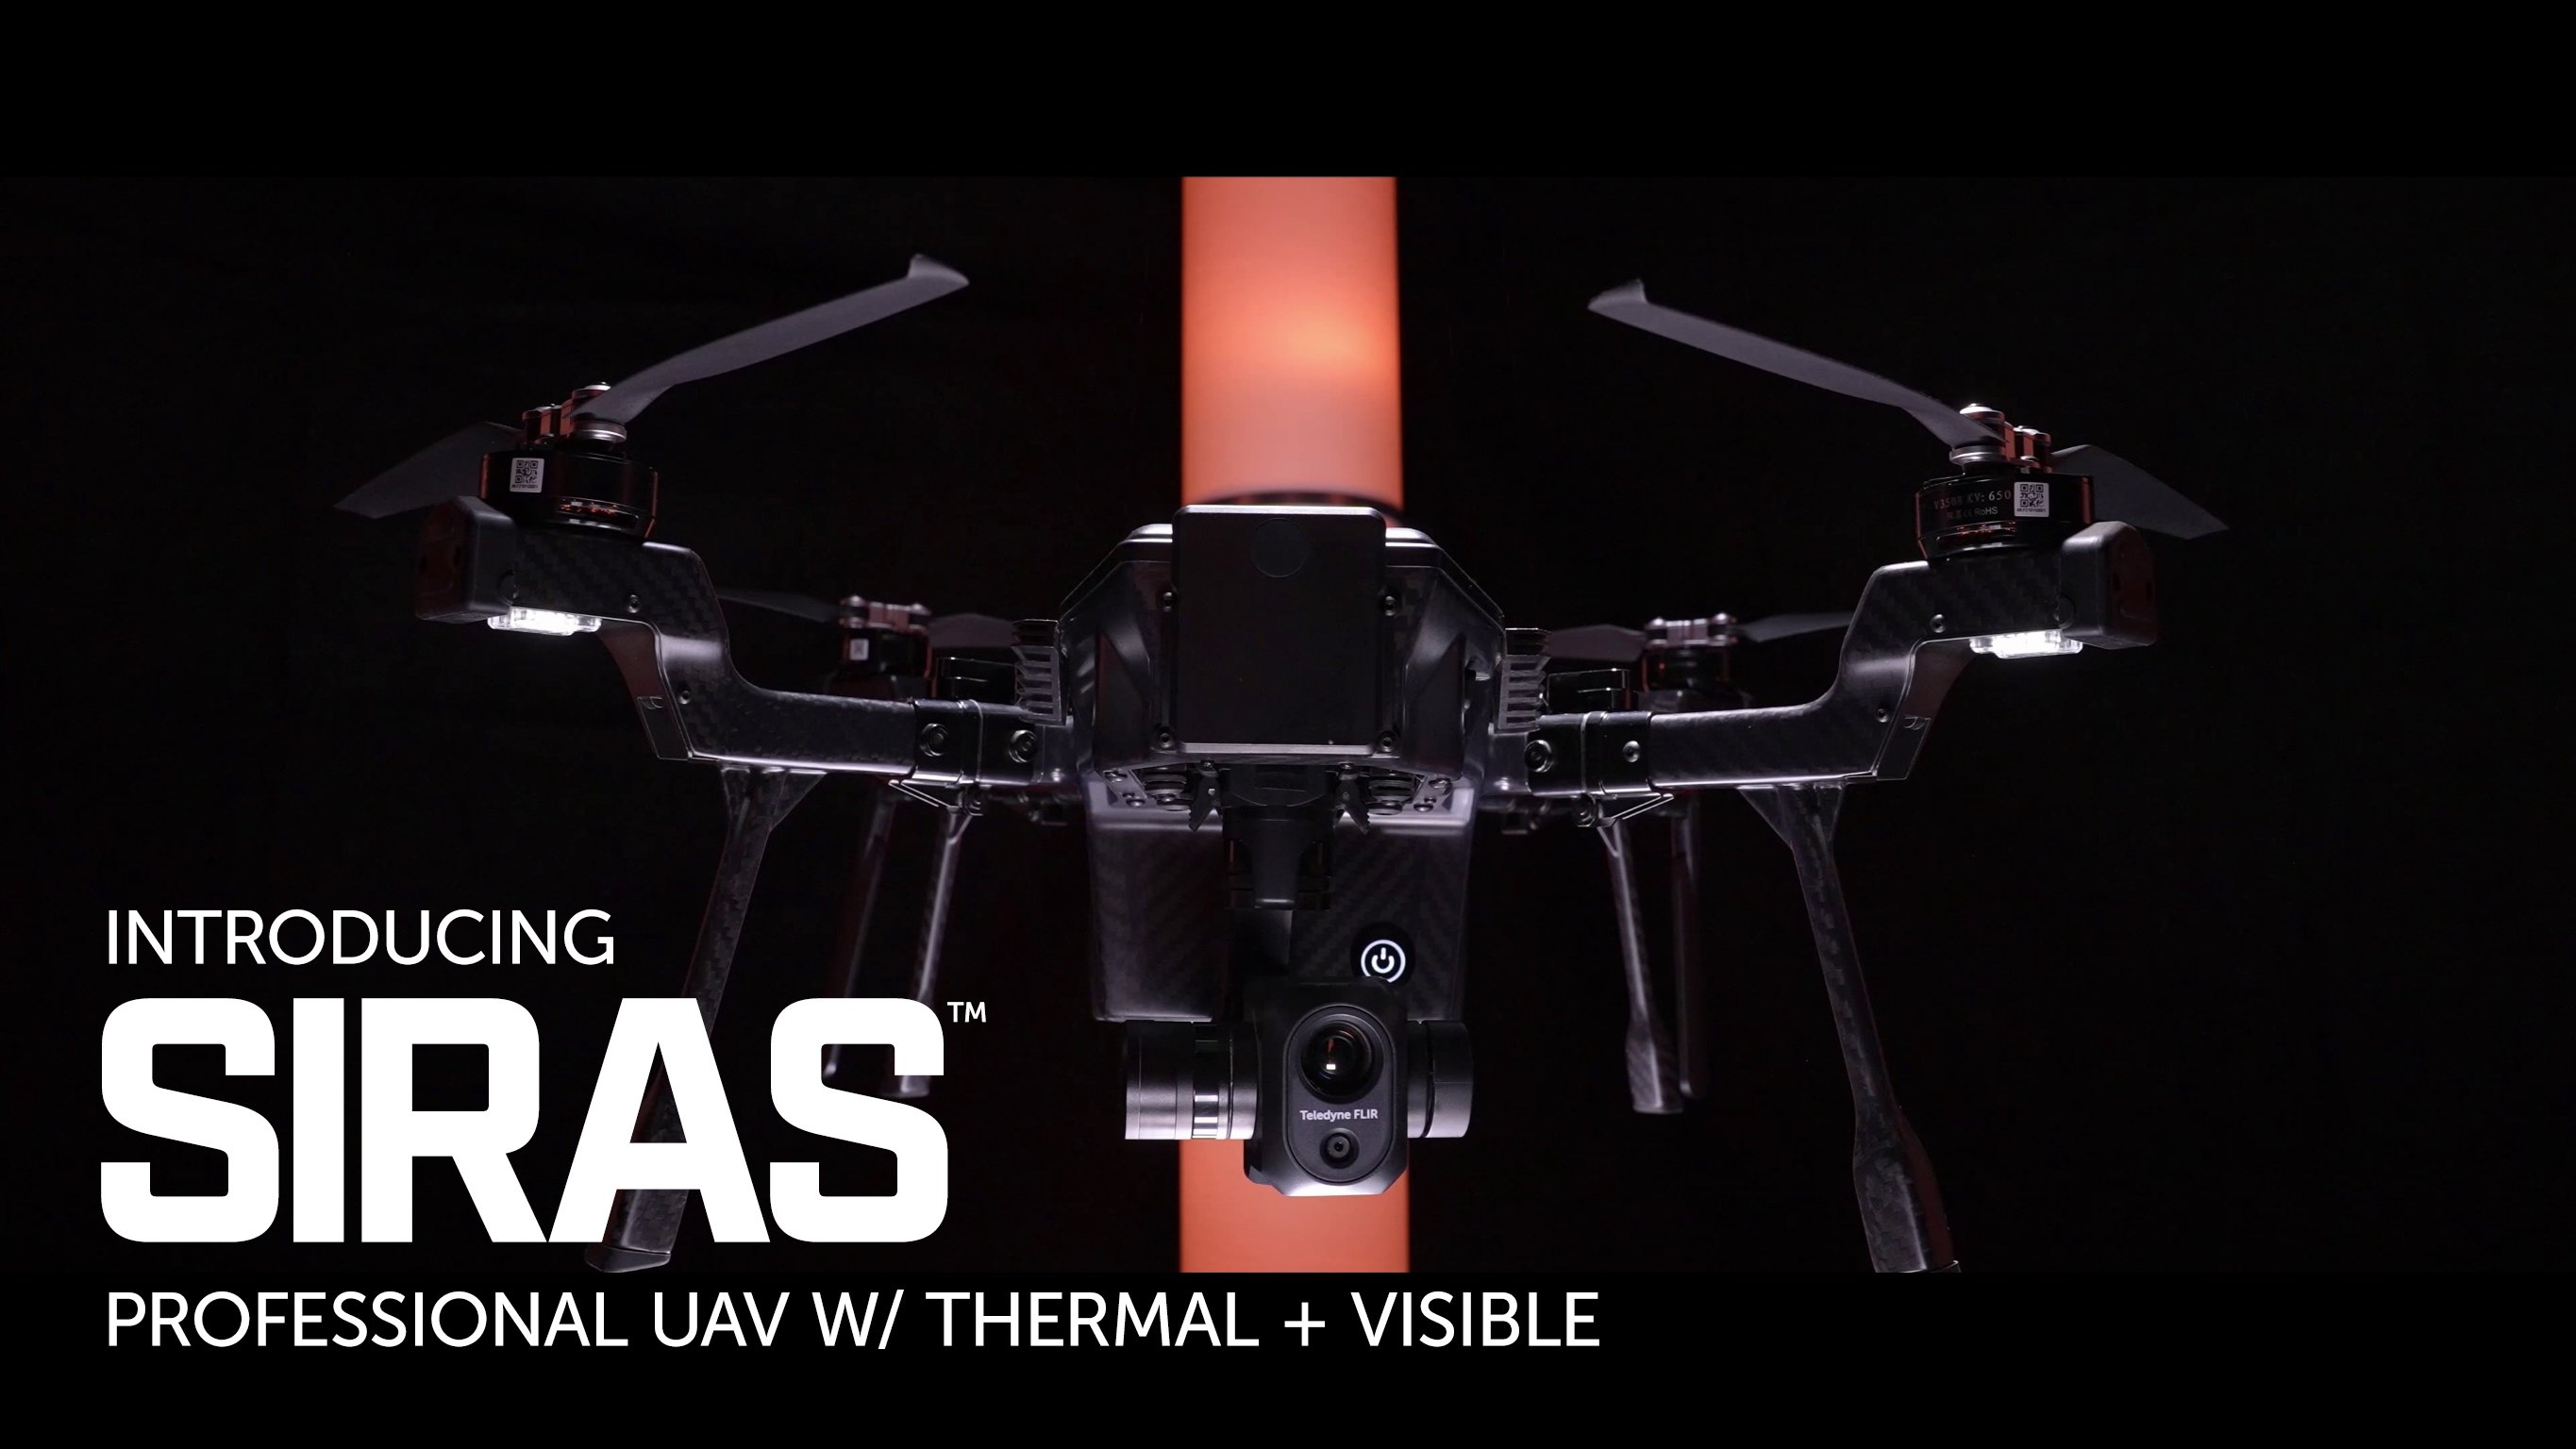 Aerial Lens Drone Surveillance System, Auto Tracking Drone Detection Camera